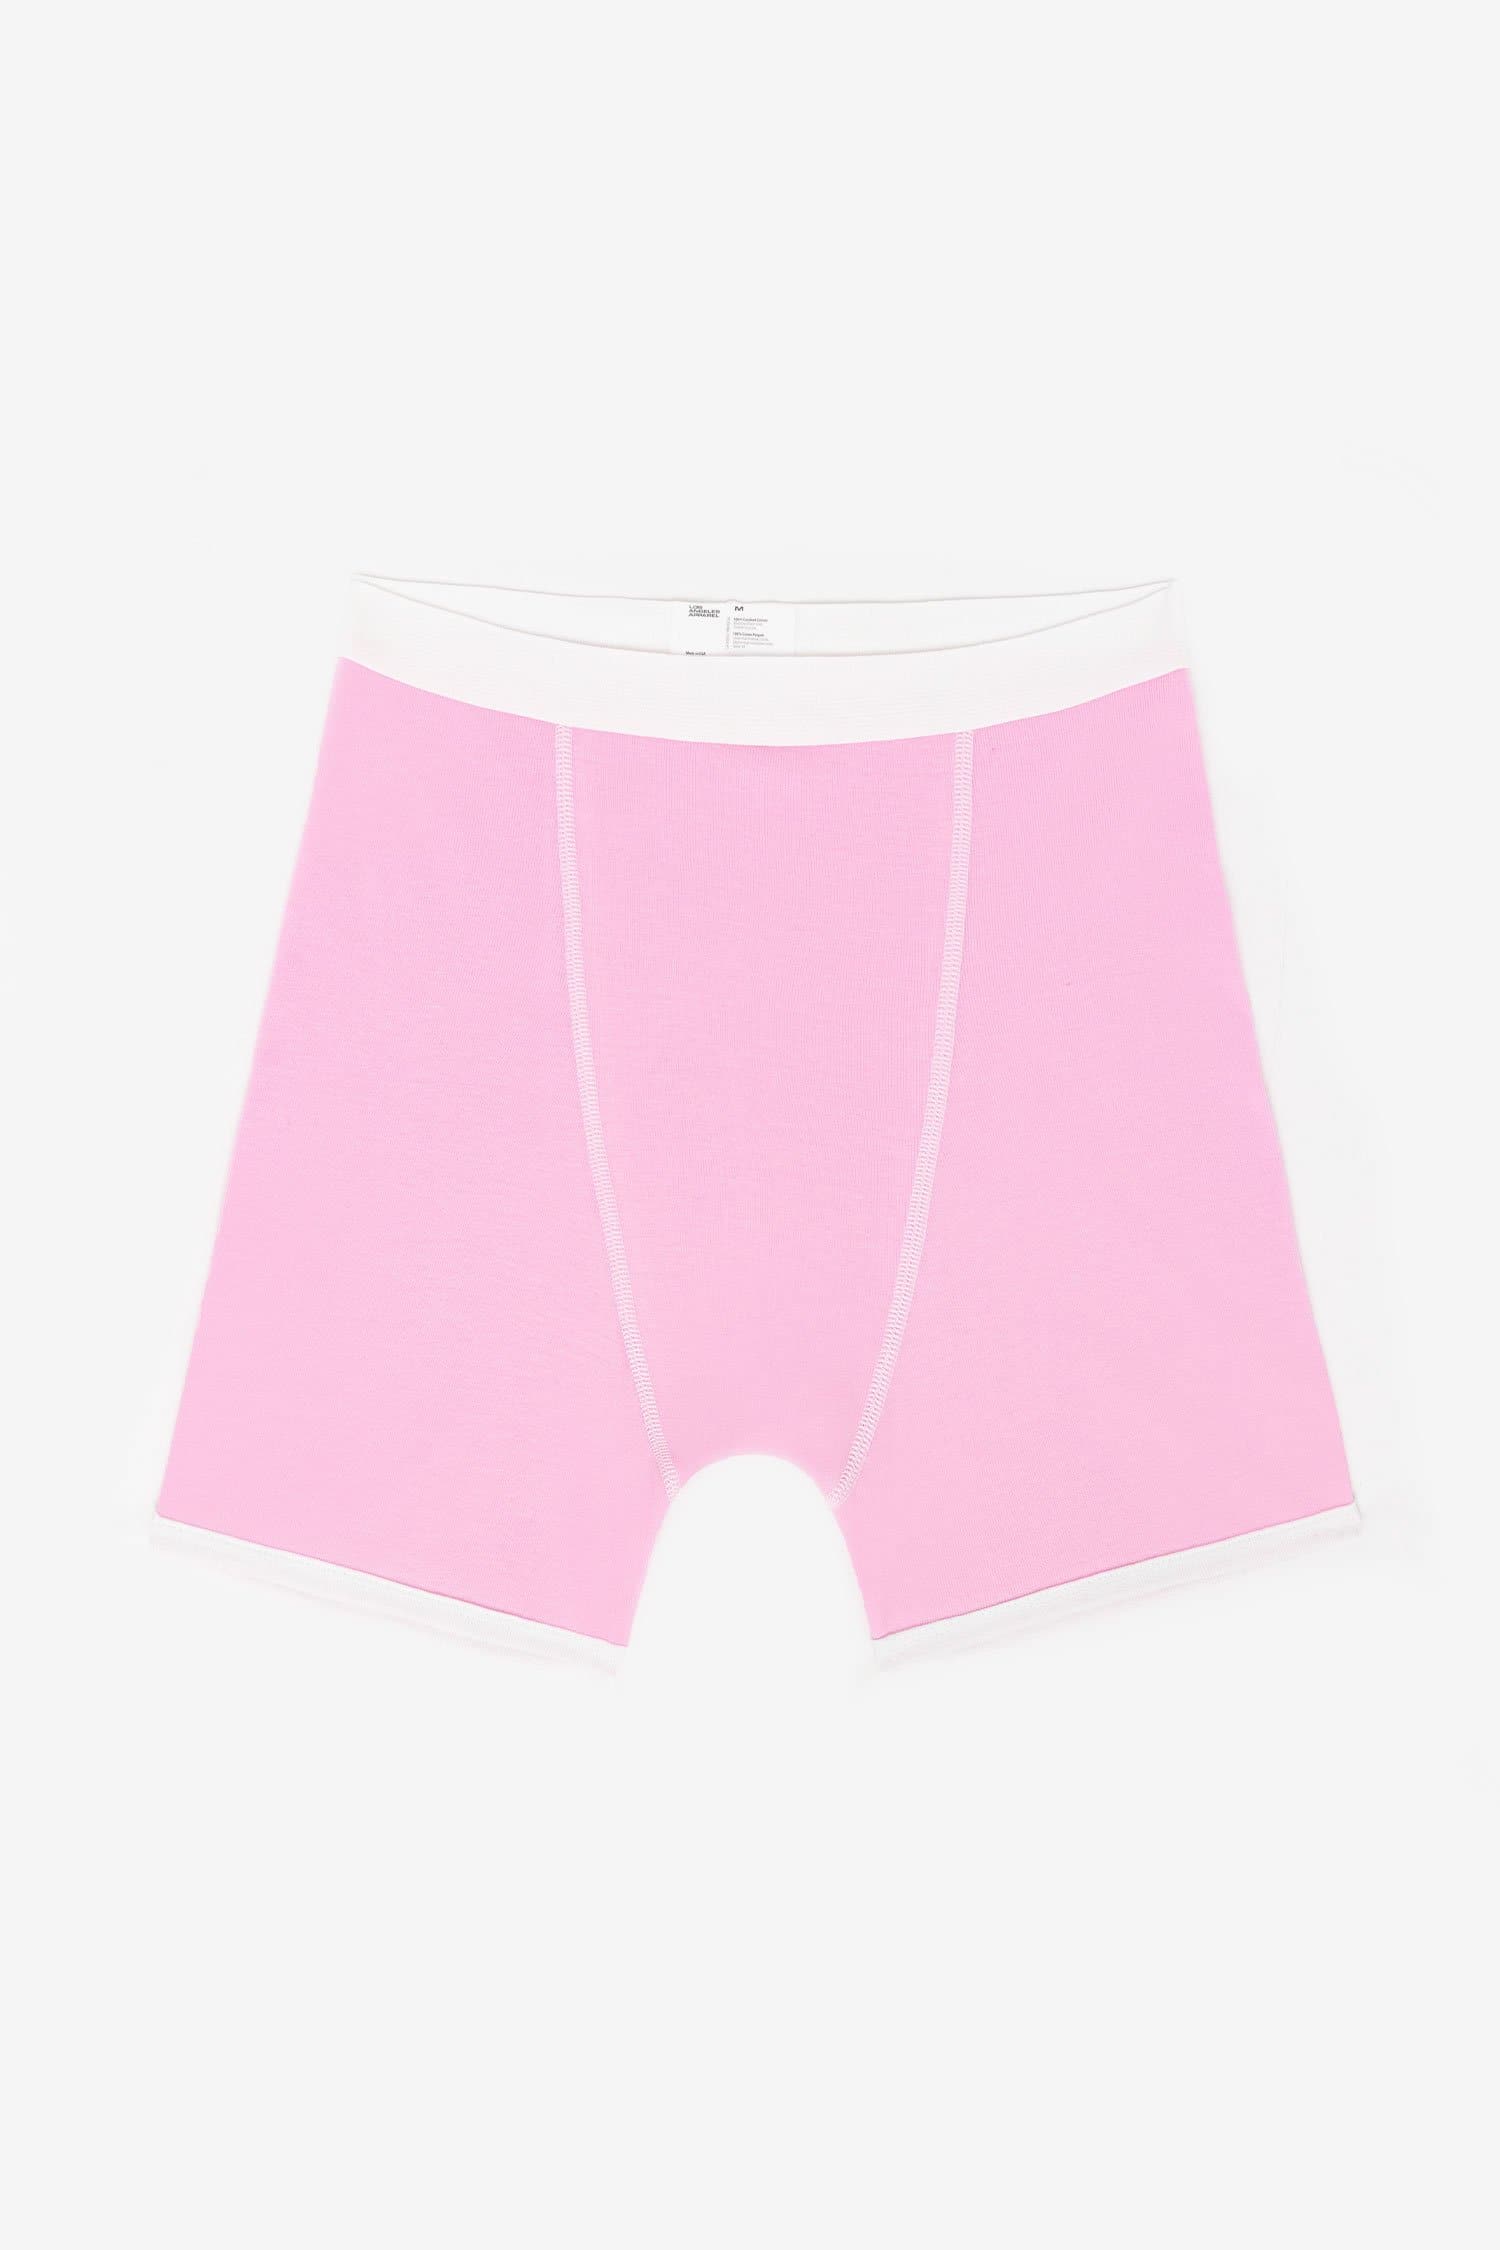 Stance Sub Tropic Boxer Brief, Pink, XL (39-42 Waist) : :  Clothing, Shoes & Accessories